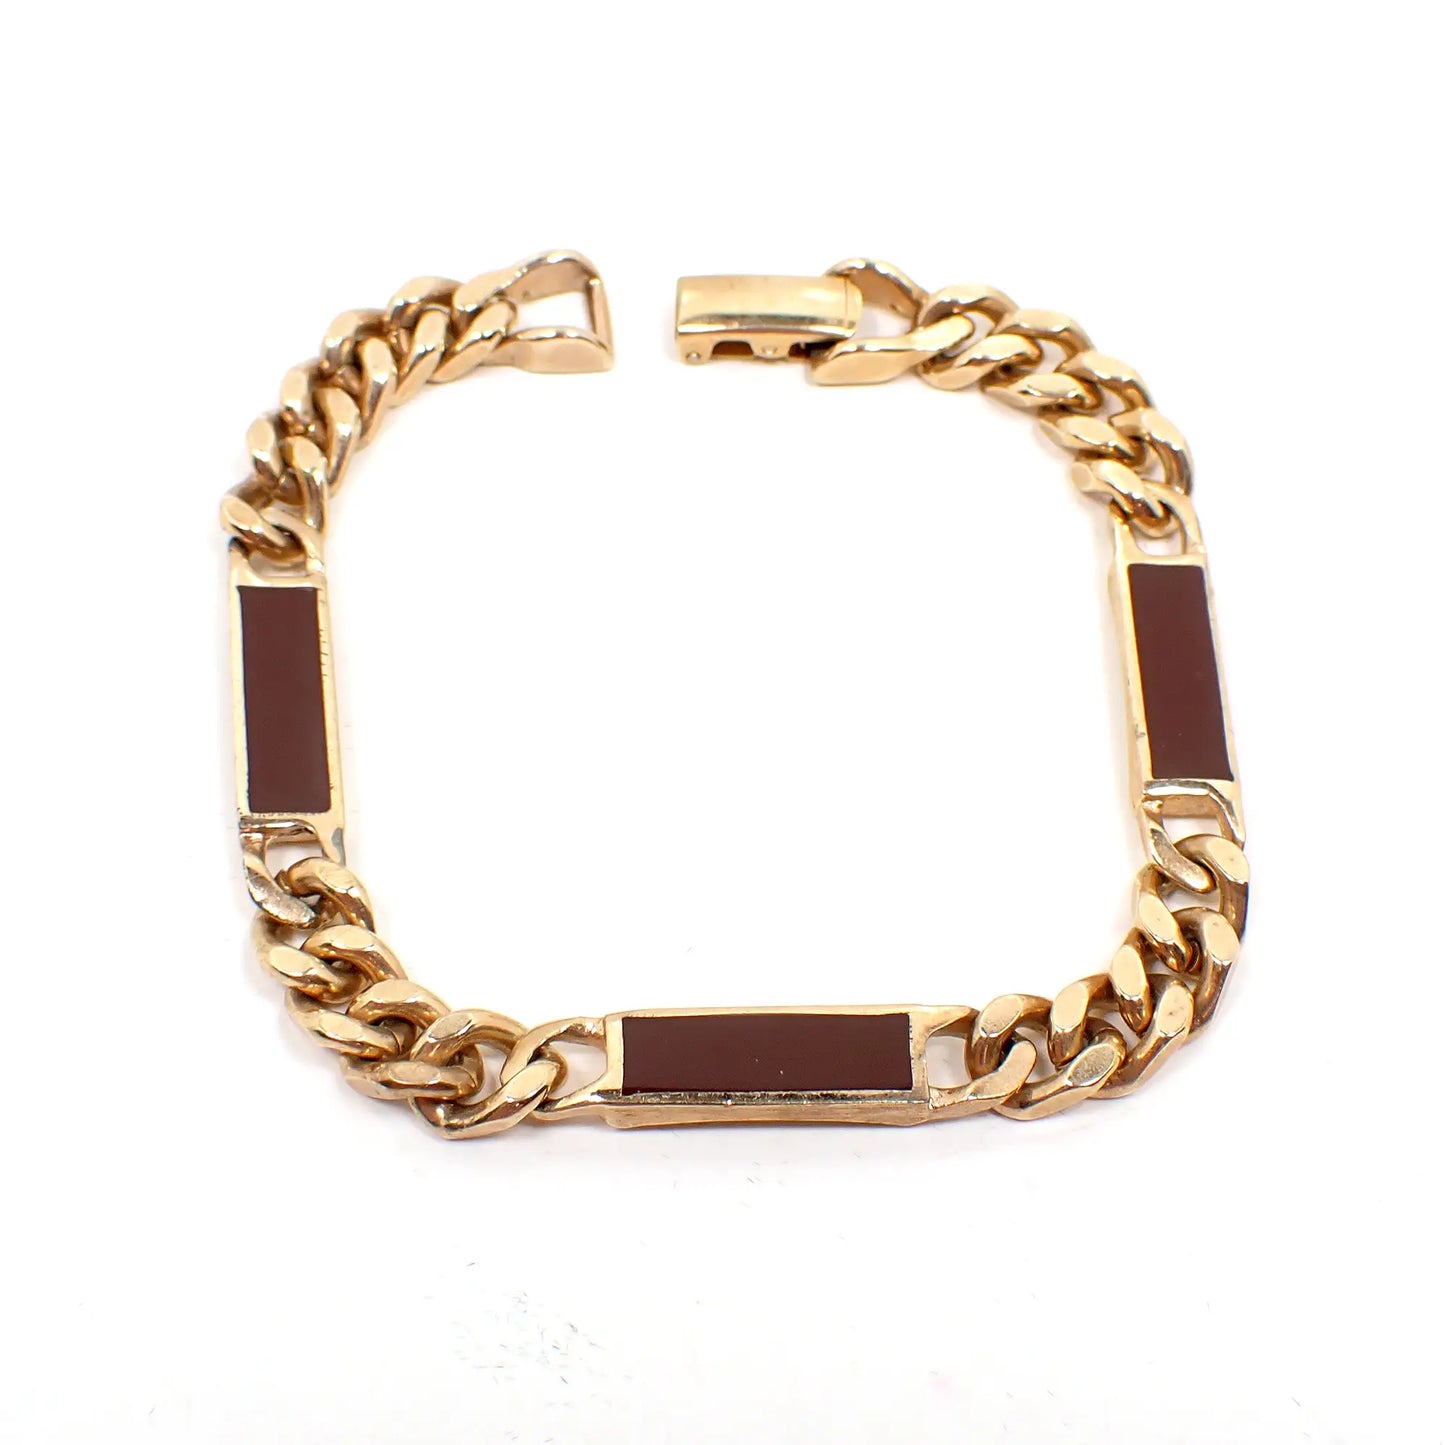 Top view of the retro vintage Avon enameled link chain bracelet. The metal is gold tone in color. There are three rectangle bar links that are burgundy colored enameled in between wider curb chain. There is a snap lock clasp at the end.